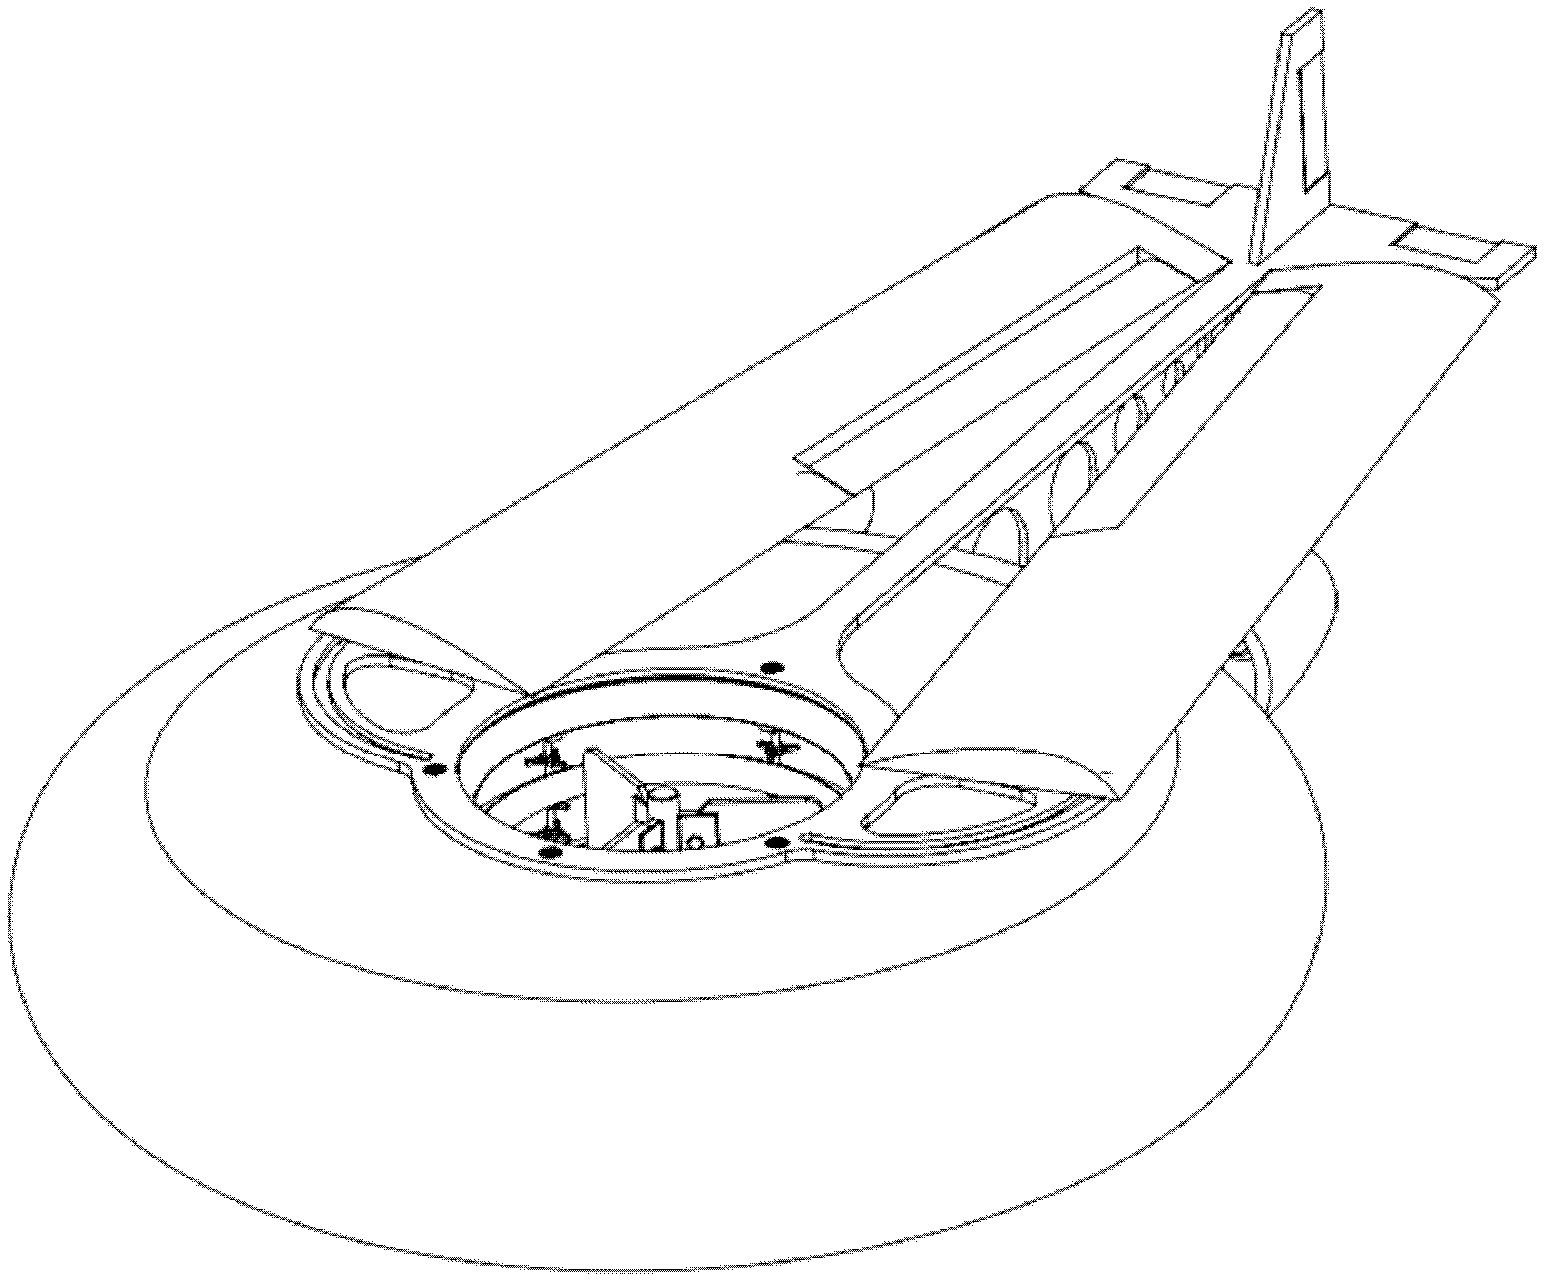 Small-sized combined type air vehicle adopting layout combining disk swing with variable wings and airbag